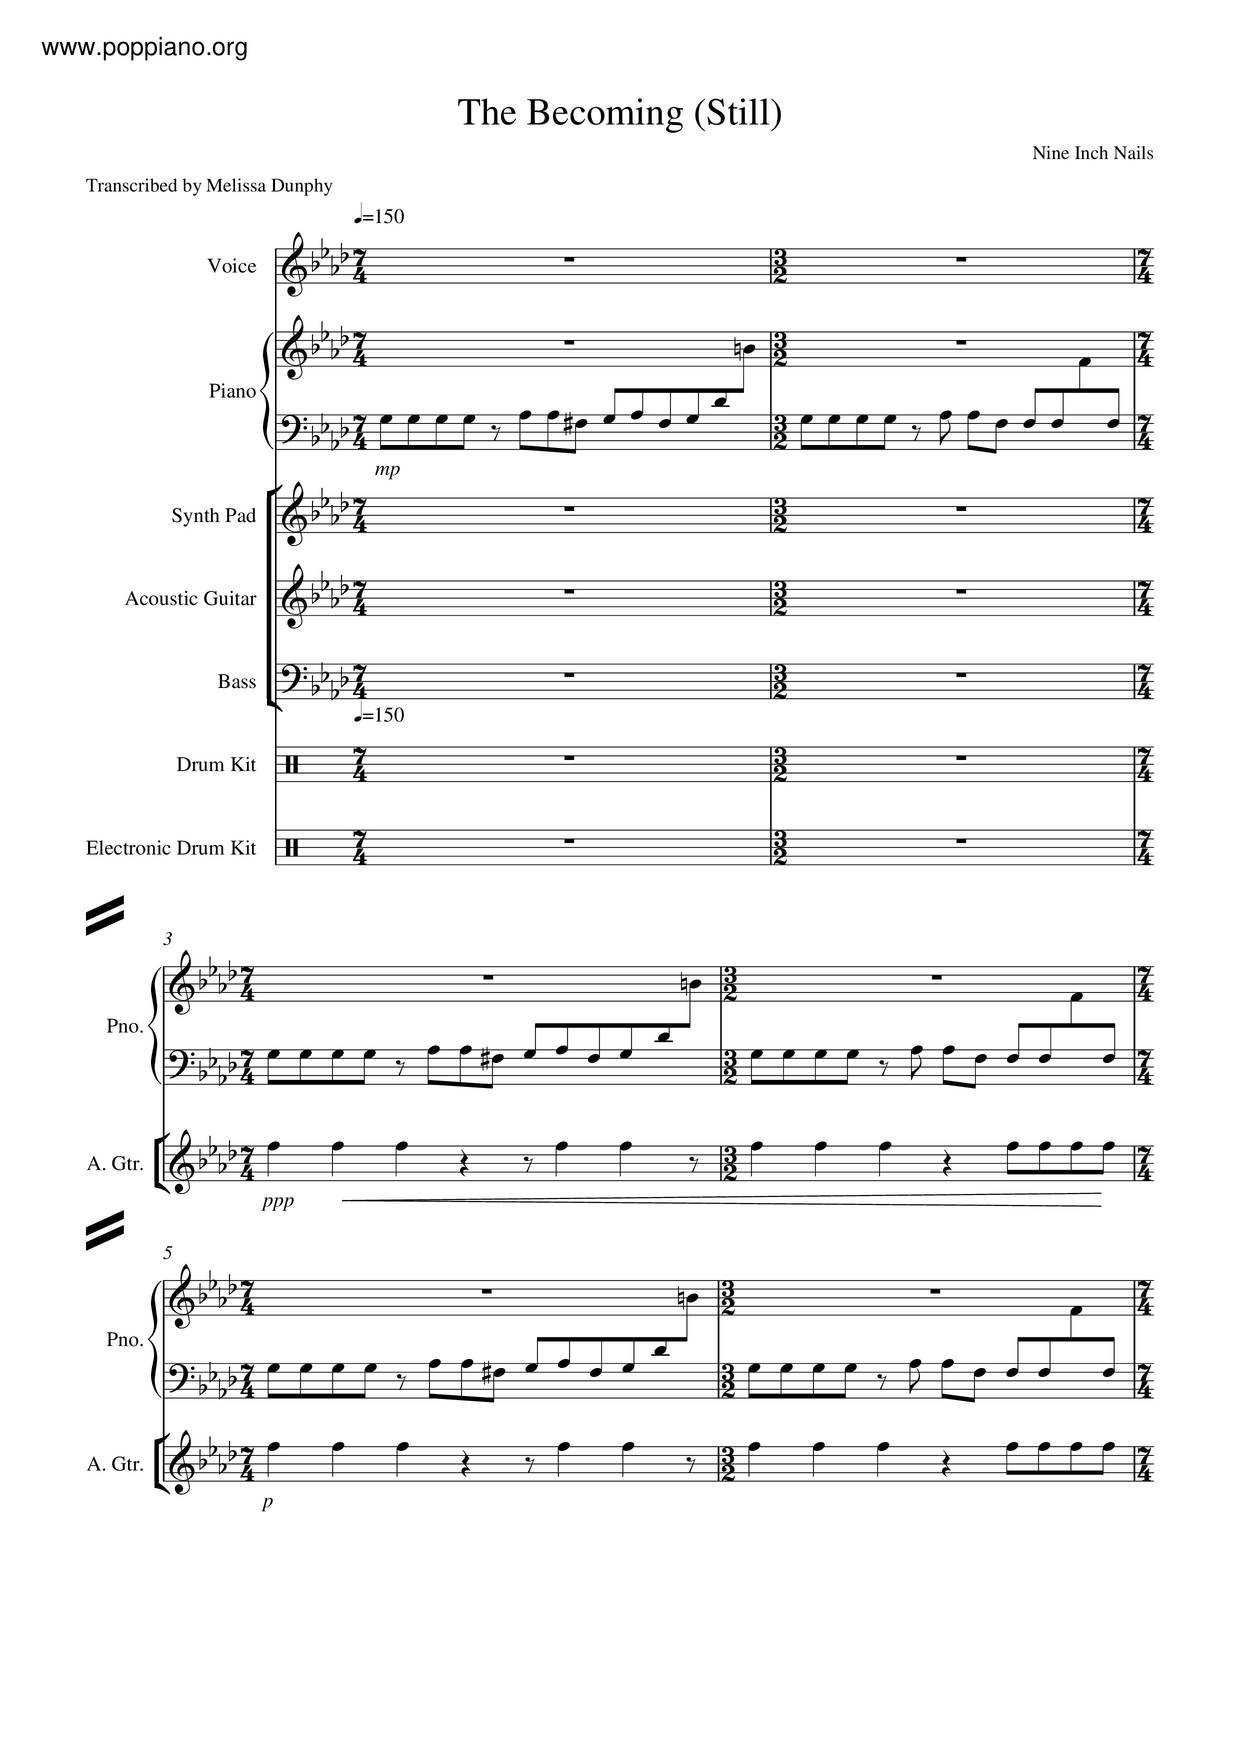 The Becoming Score